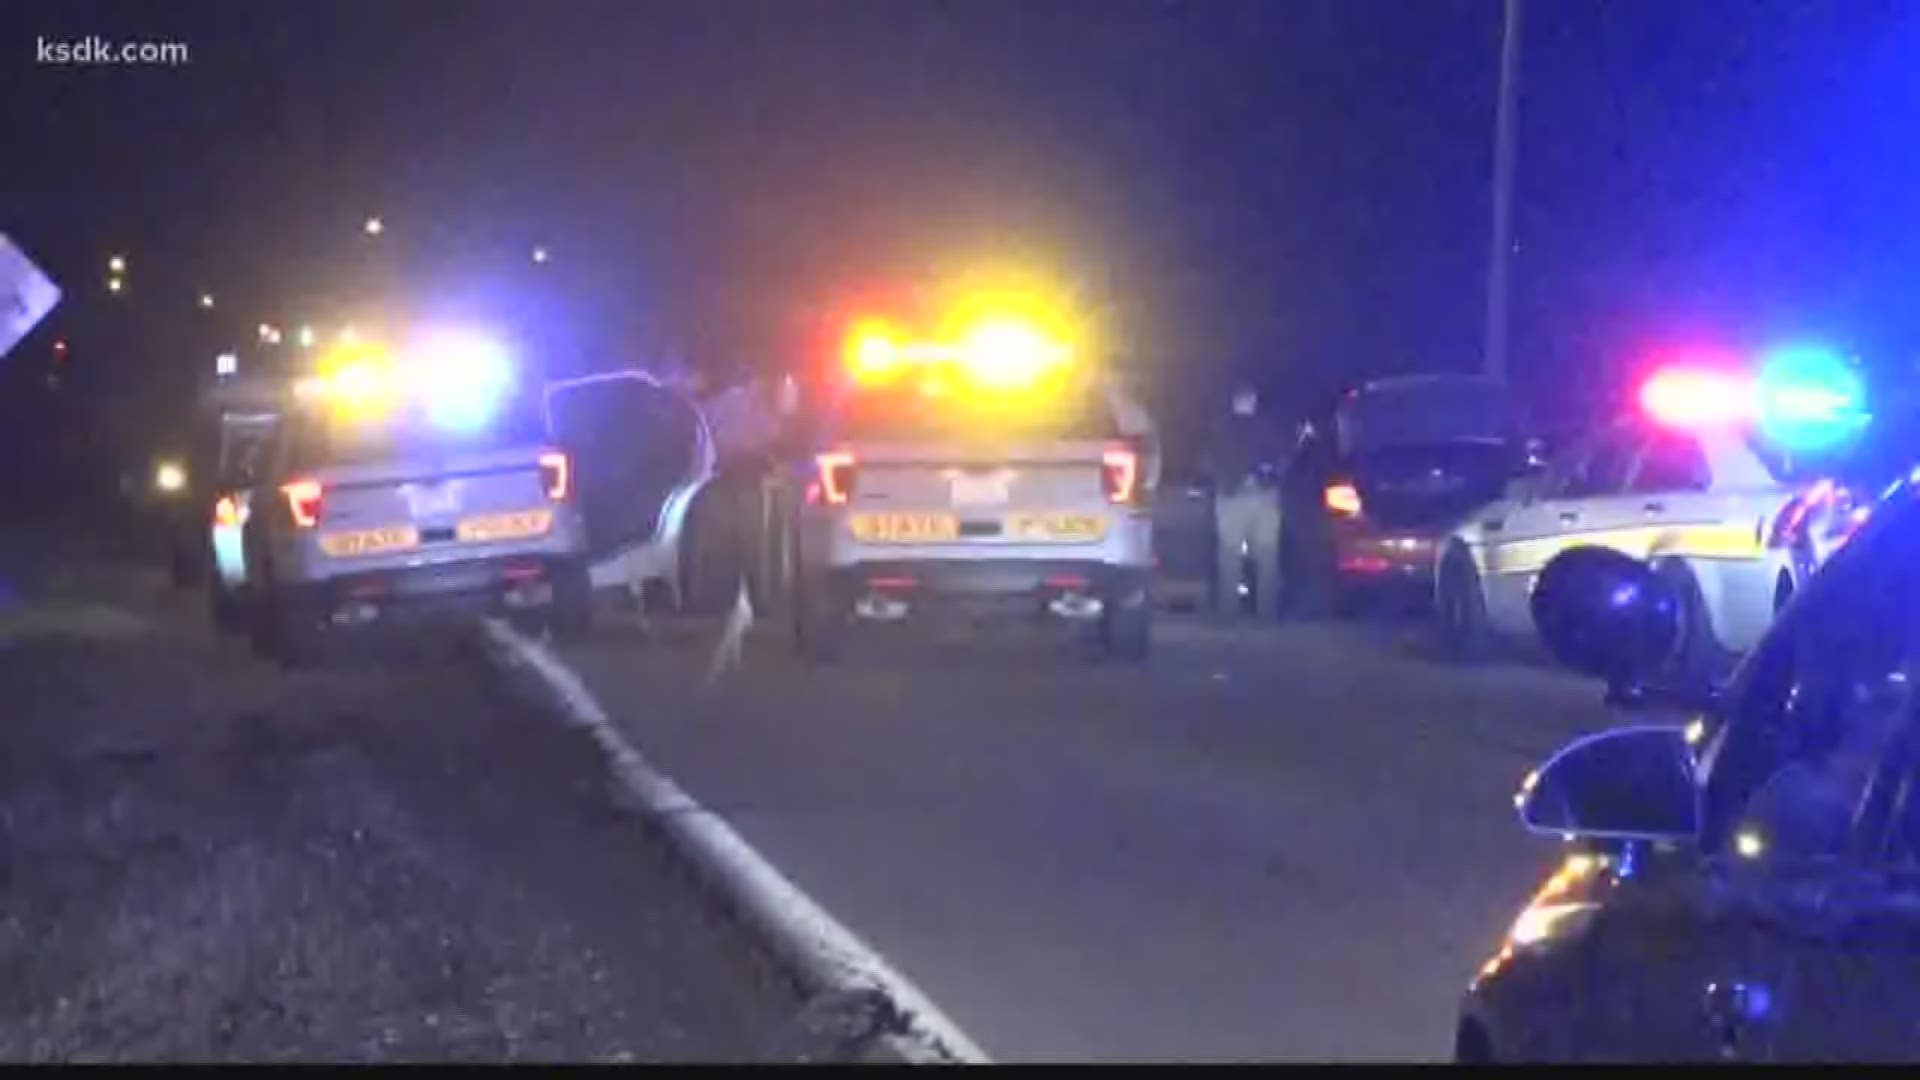 The carjacking happened in Dellwood and a police pursuit crossed over into Illinois.